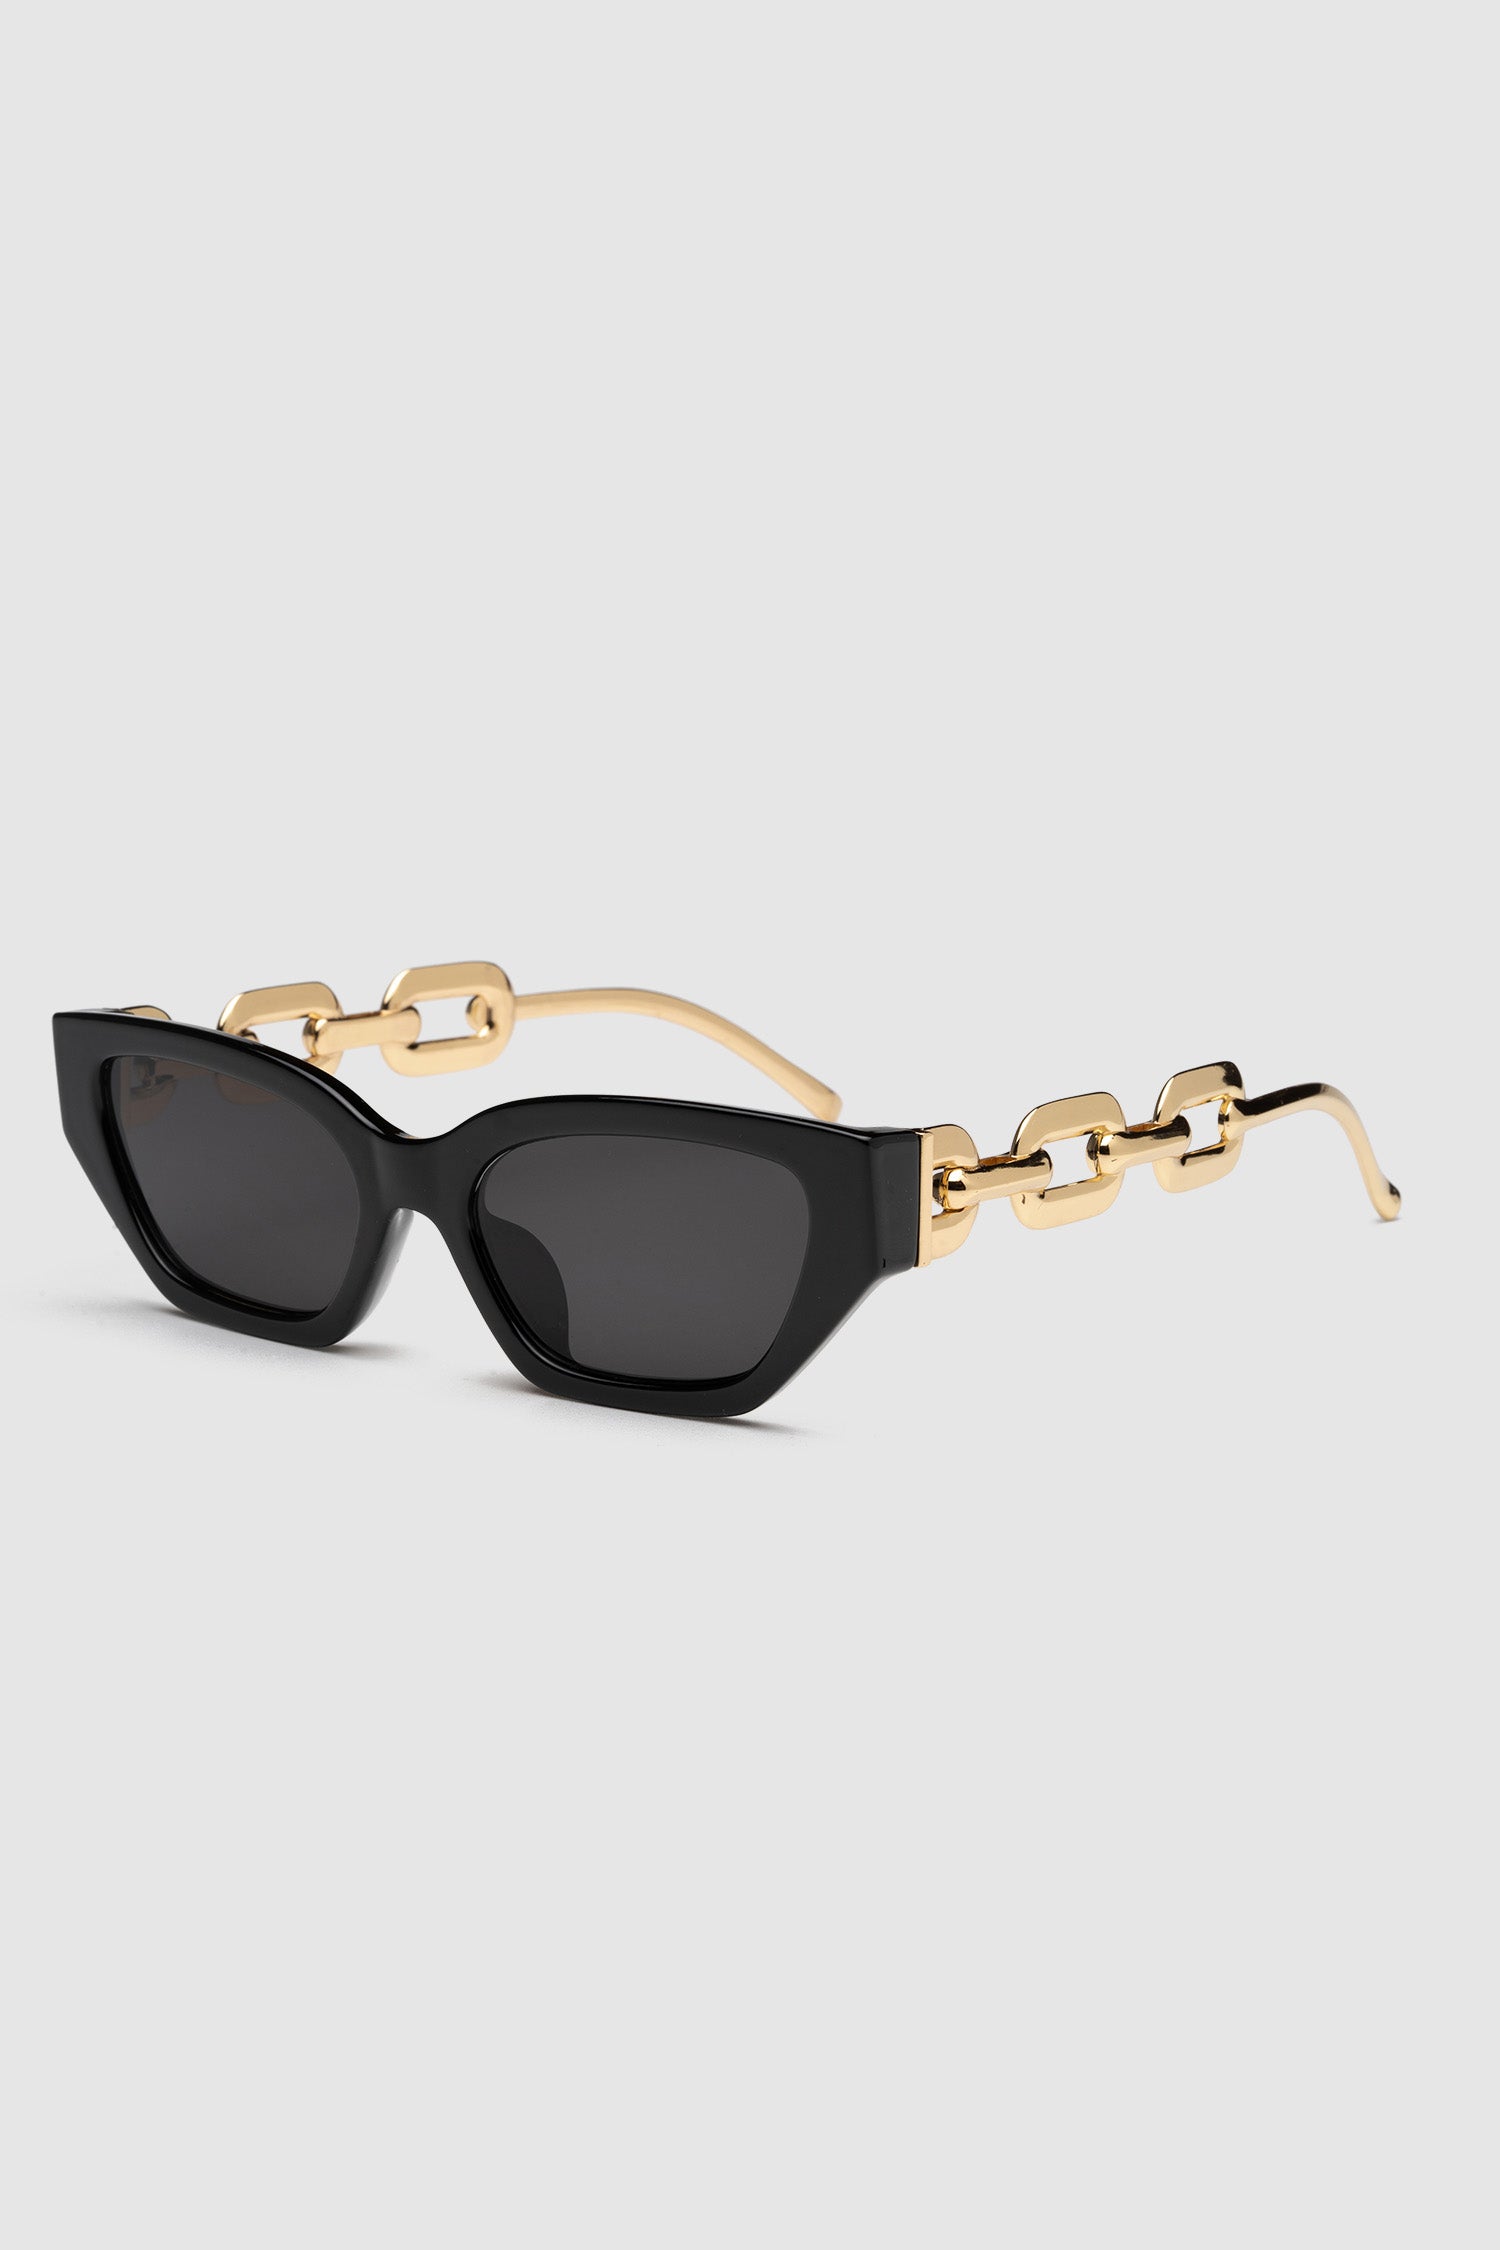 Cat Eyes with Gold Chain Arms - Black